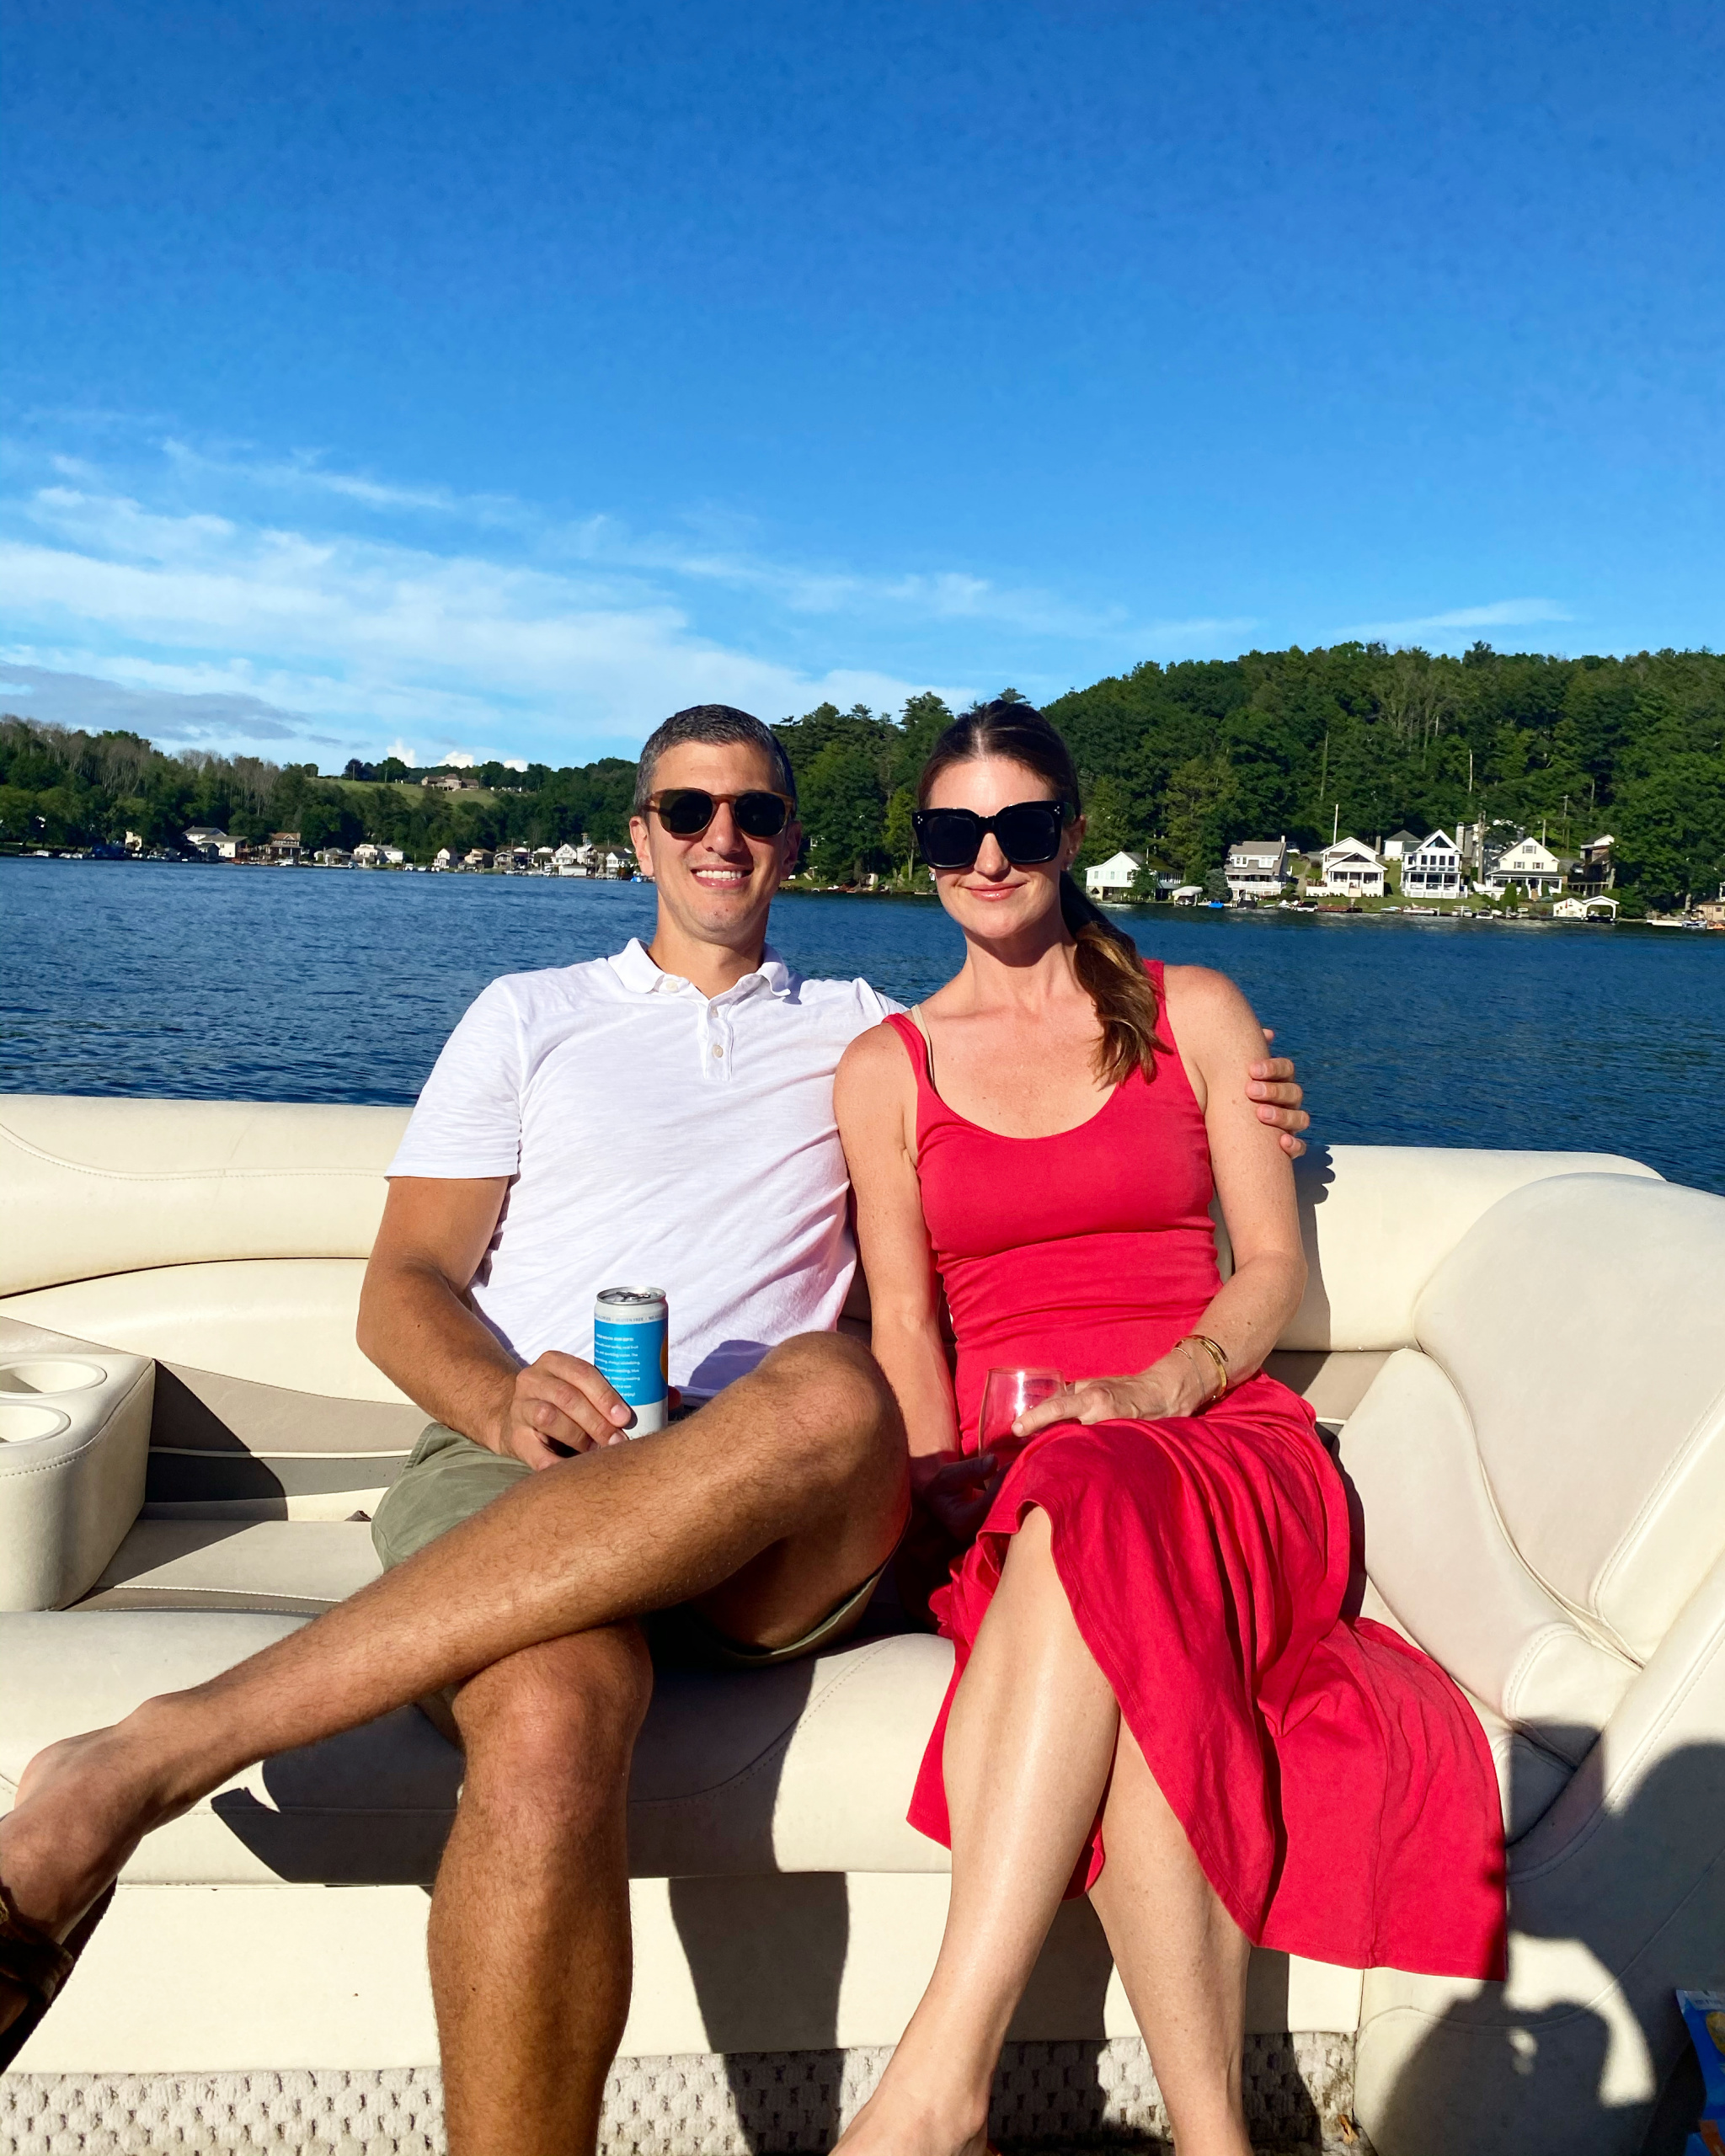 Sunset dinner parties on the lake, lake vacation outfits